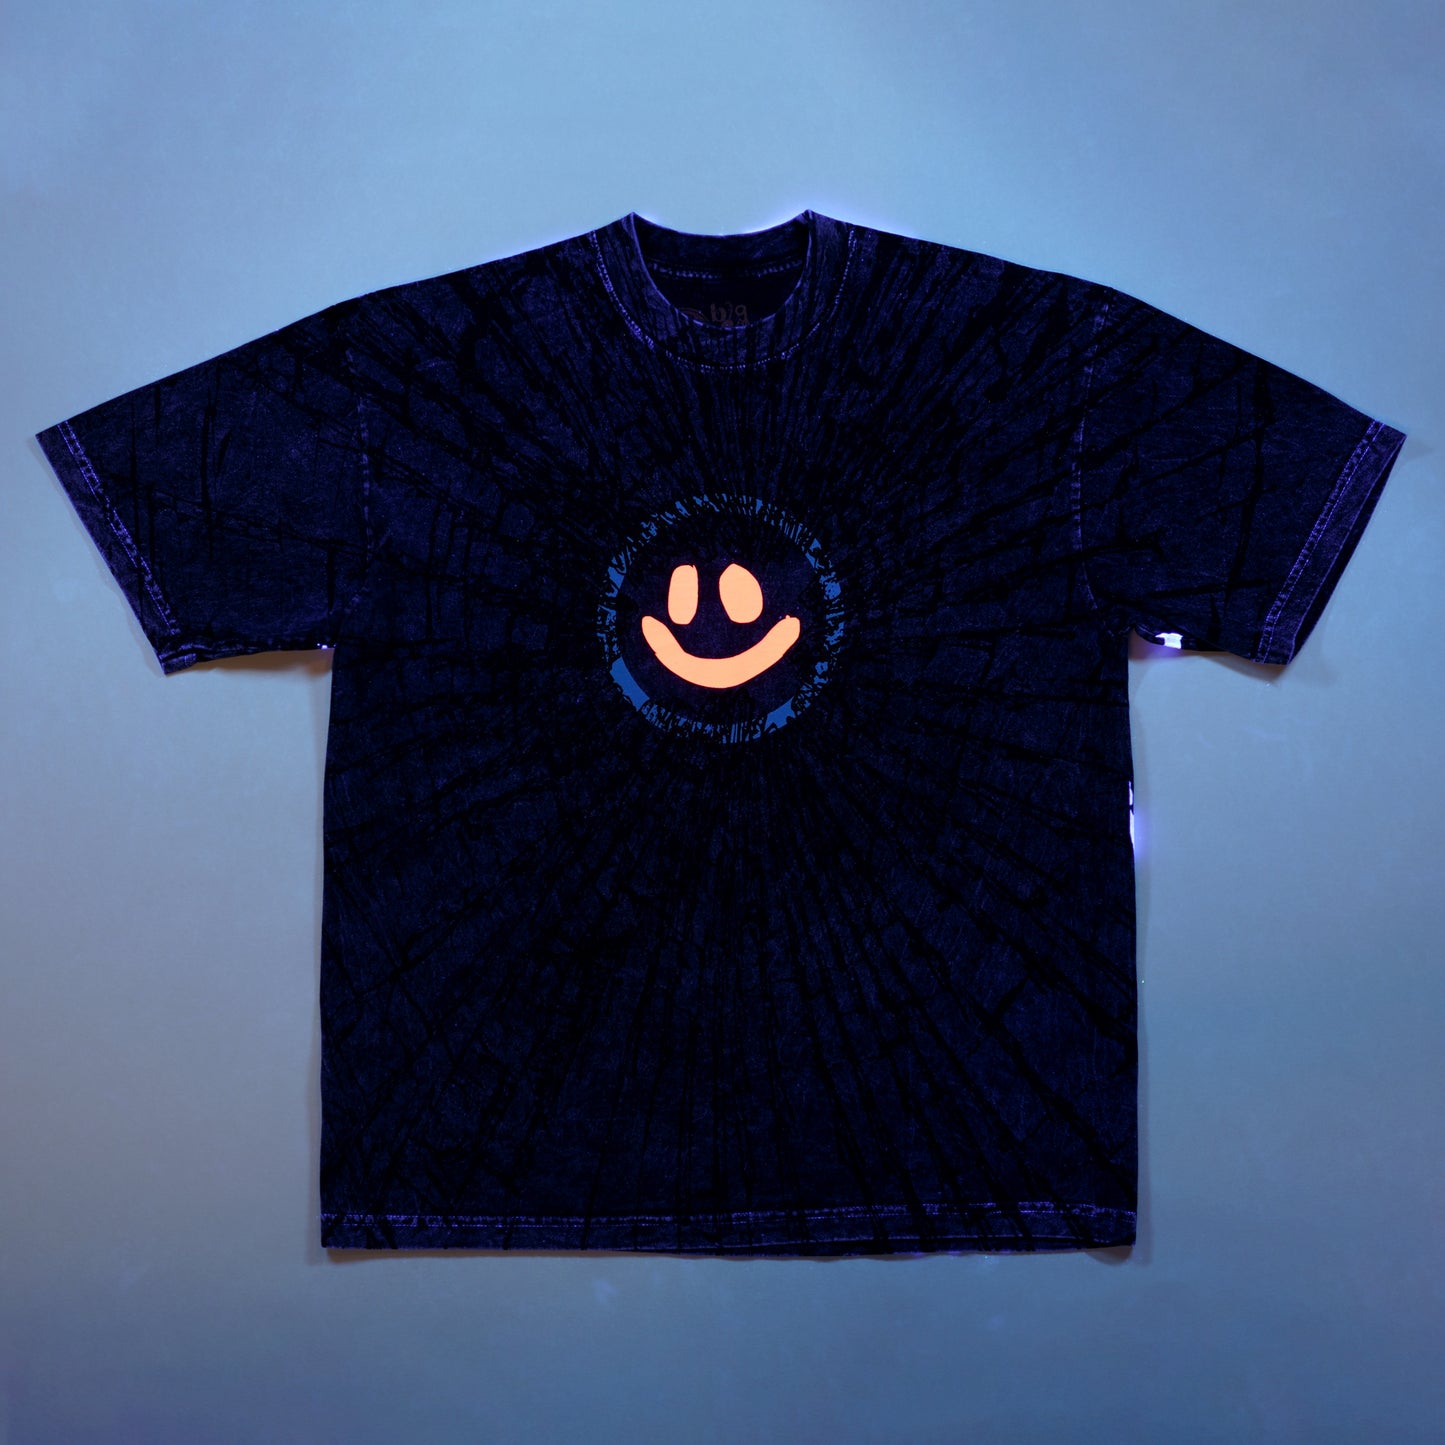 Cracked Smiley Tee (Carbon)